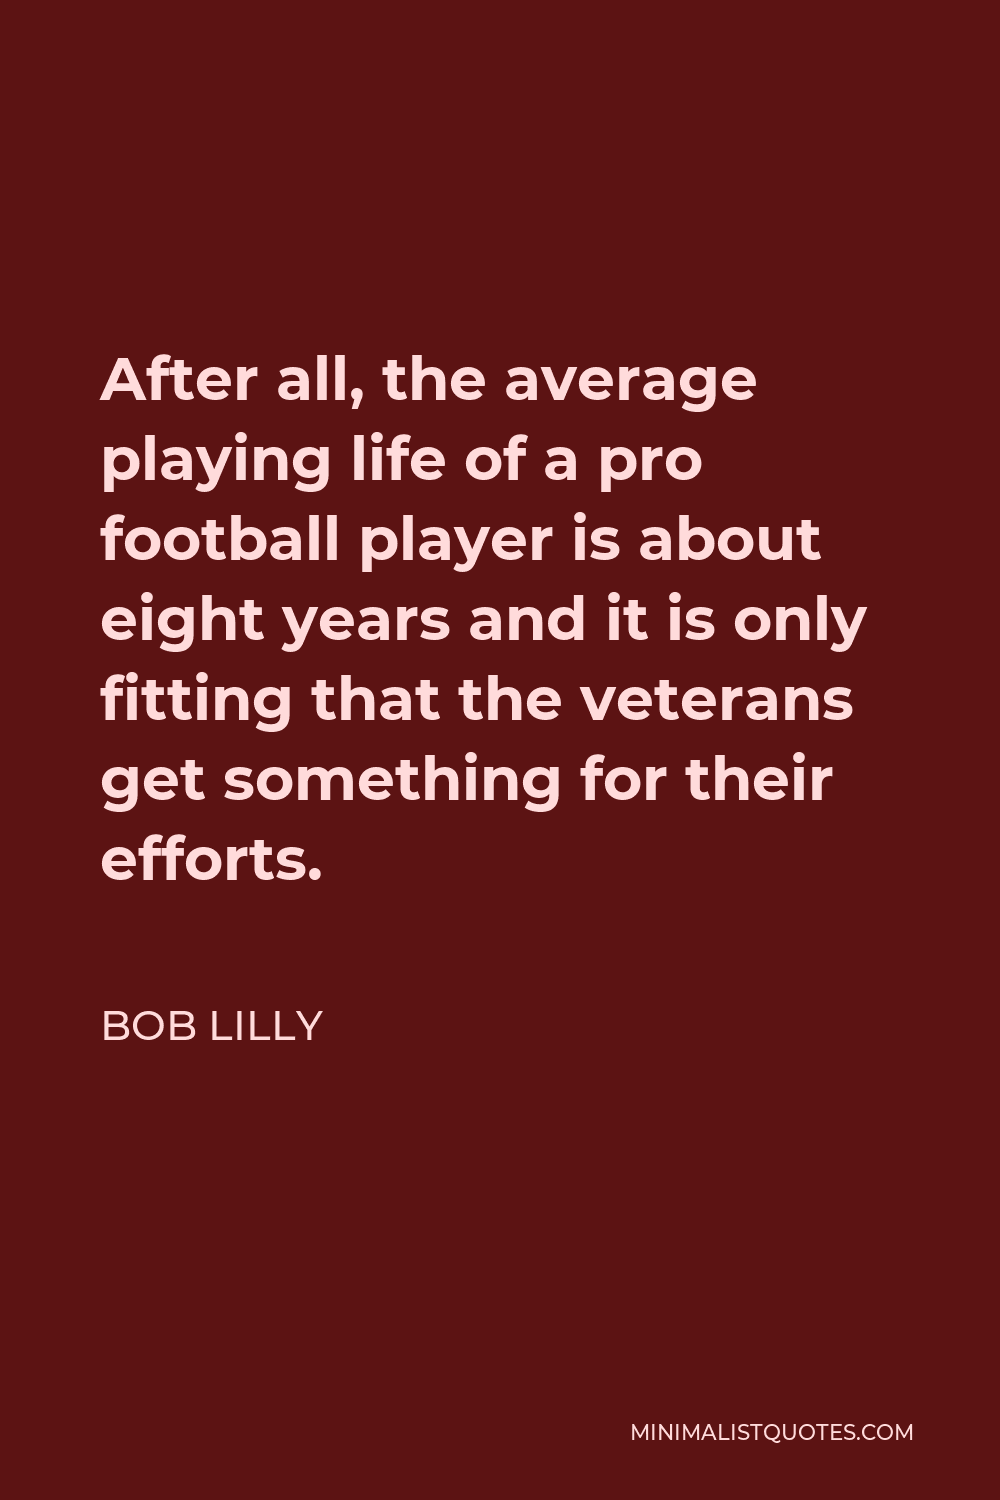 Bob Lilly Quote - After all, the average playing life of a pro football player is about eight years and it is only fitting that the veterans get something for their efforts.